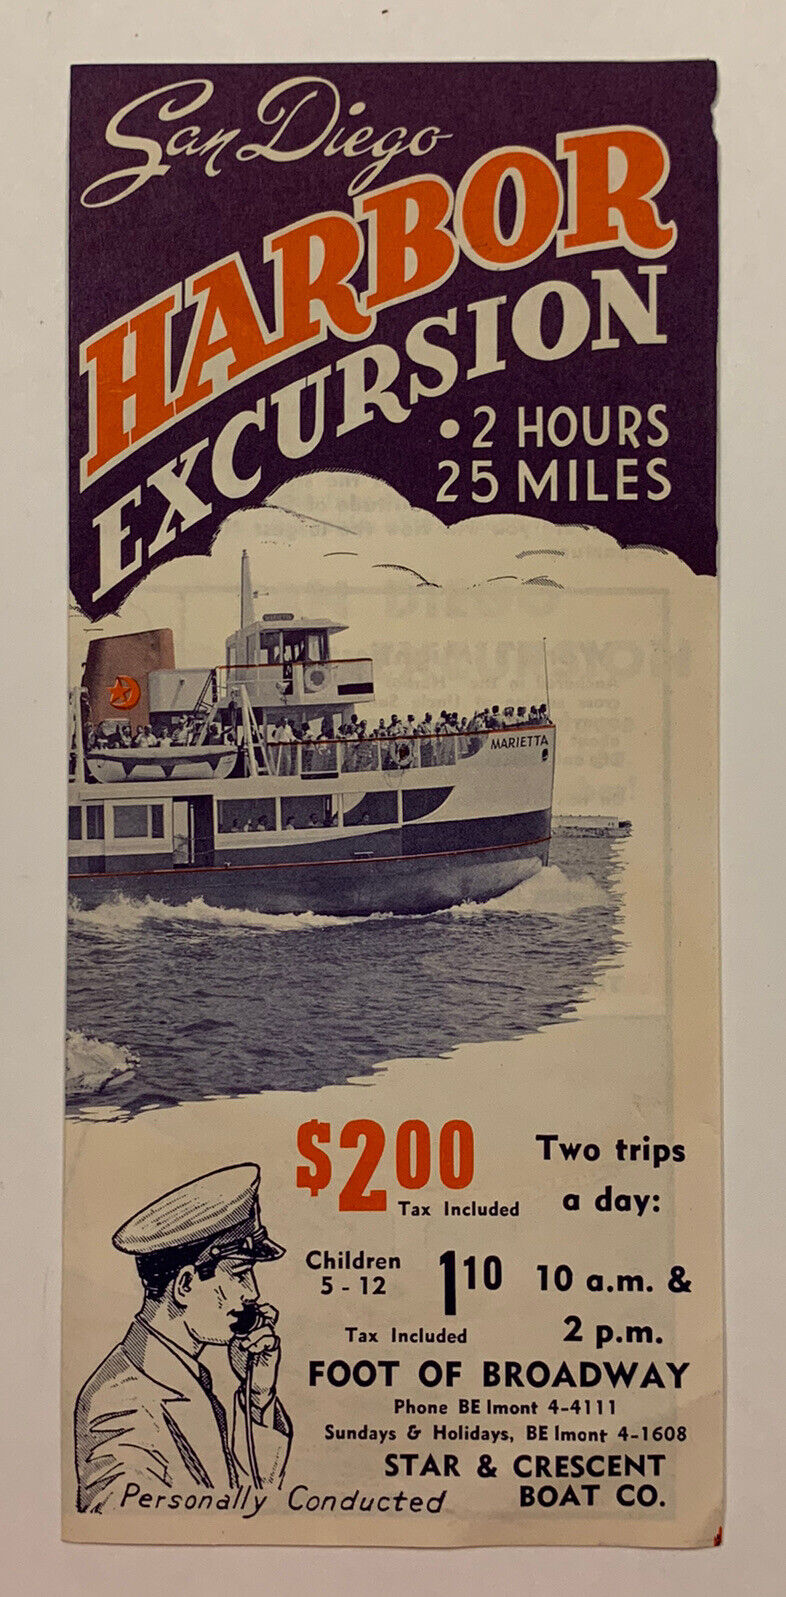 BROCHURE: 1950s SAN DIEGO HARBOR EXCURSION - Sightseeting - Star & Crescent Boat